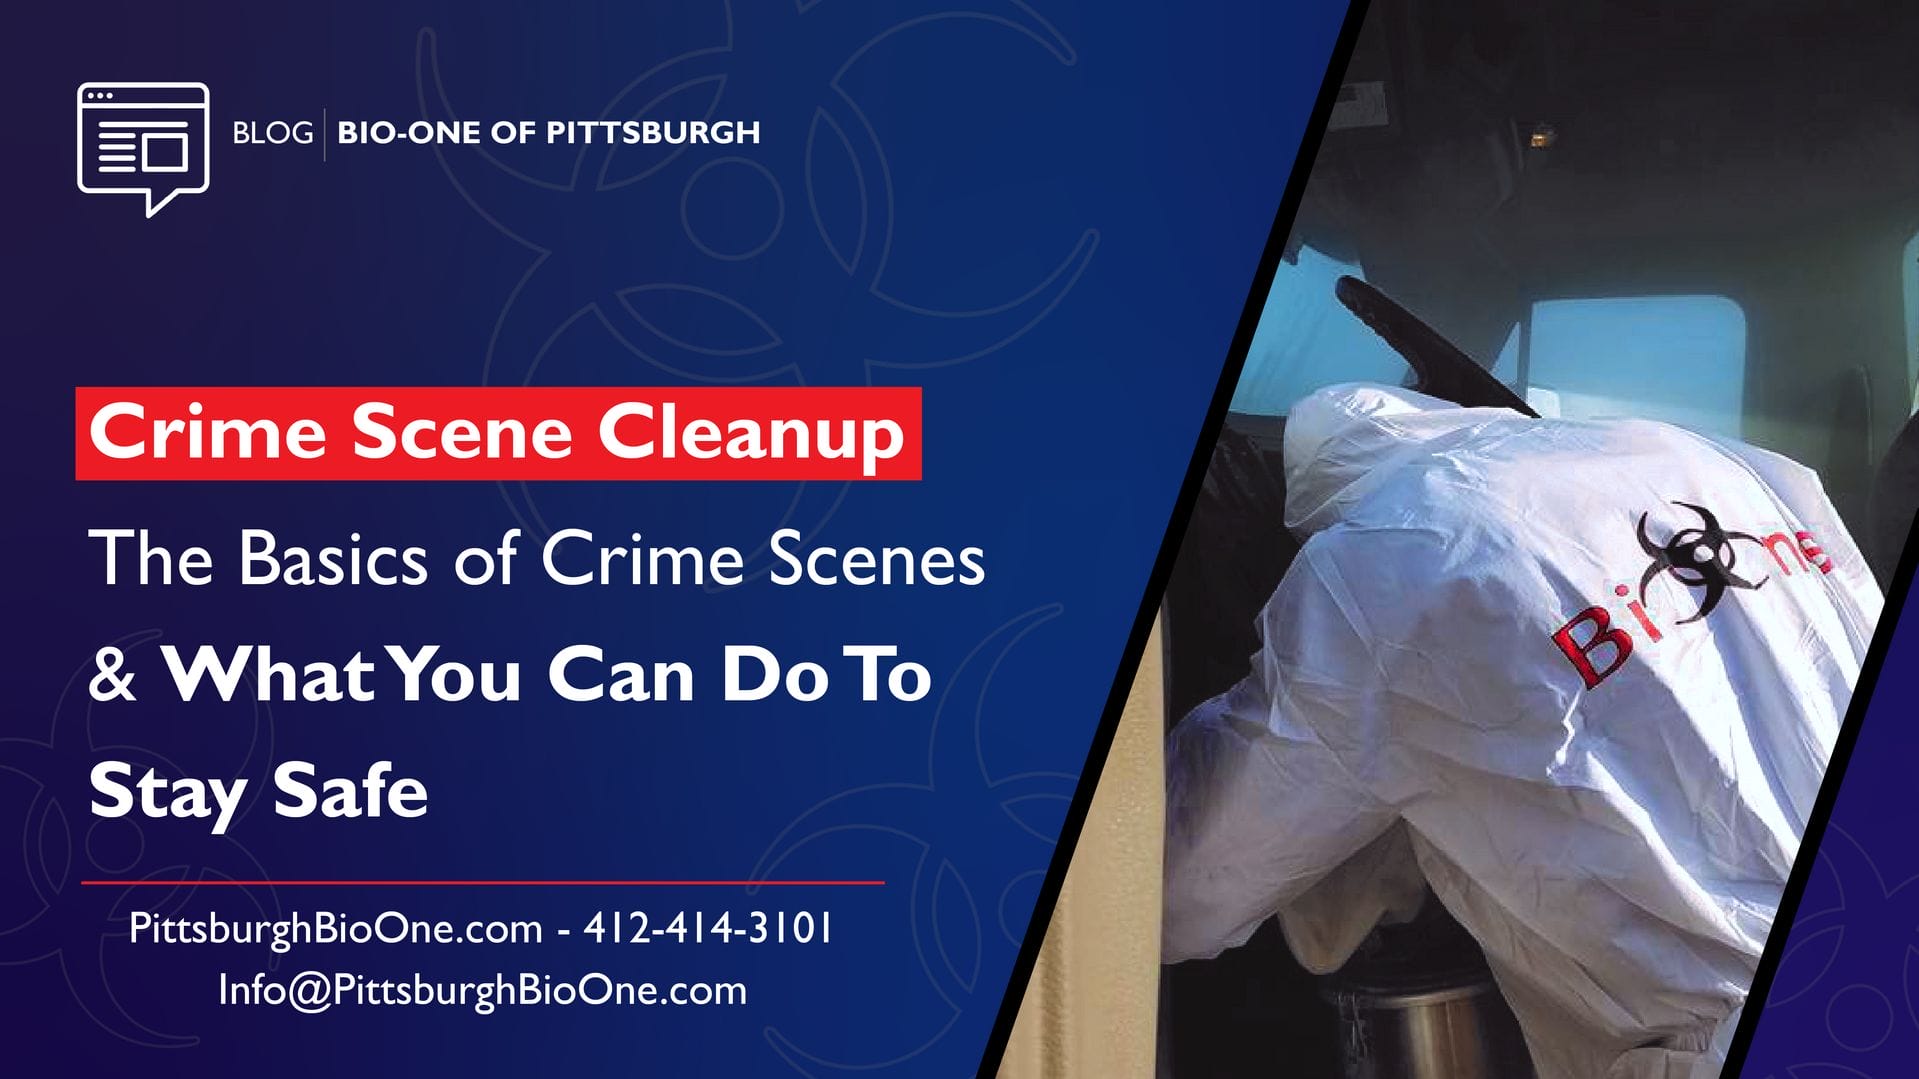 The Basics of Crime Scenes & What You Can Do To Stay Safe